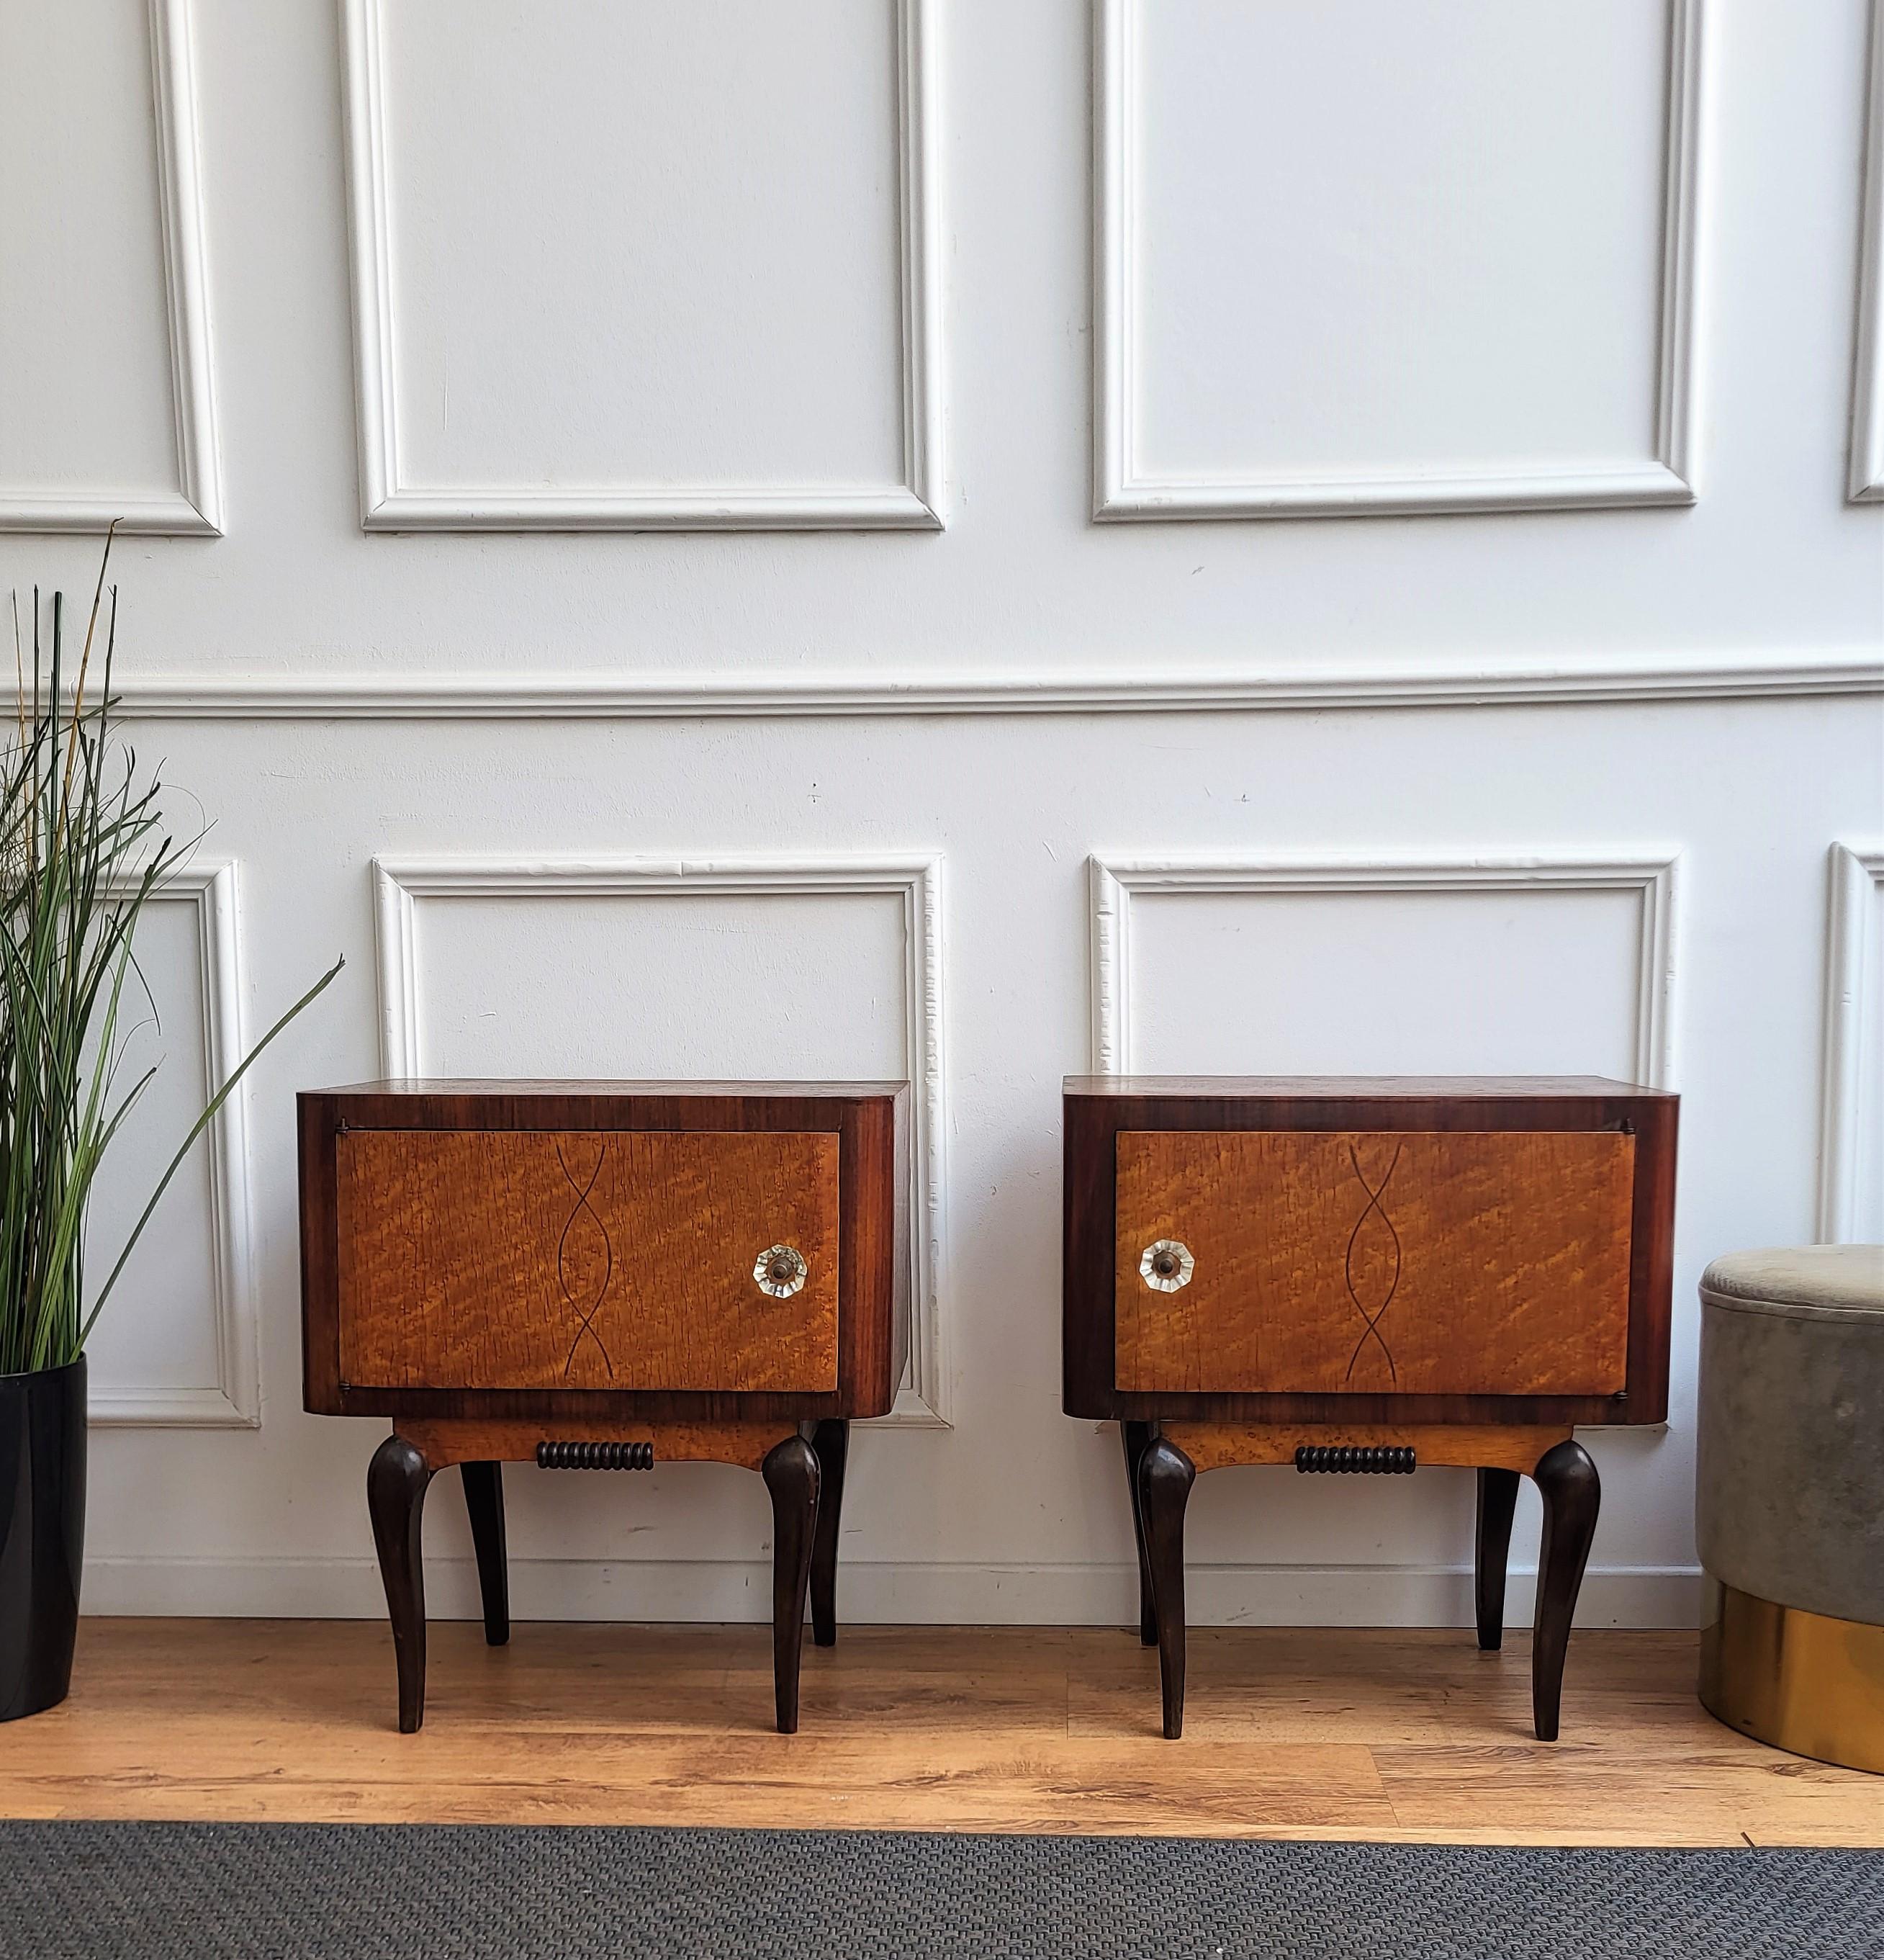 Very elegant and refined pair of Italian 1940s Art Deco bedside tables with great design shape and decors in veneer walnut wood and front door. This night stands make a great look in any style bedroom, as a complementary design and especially as a